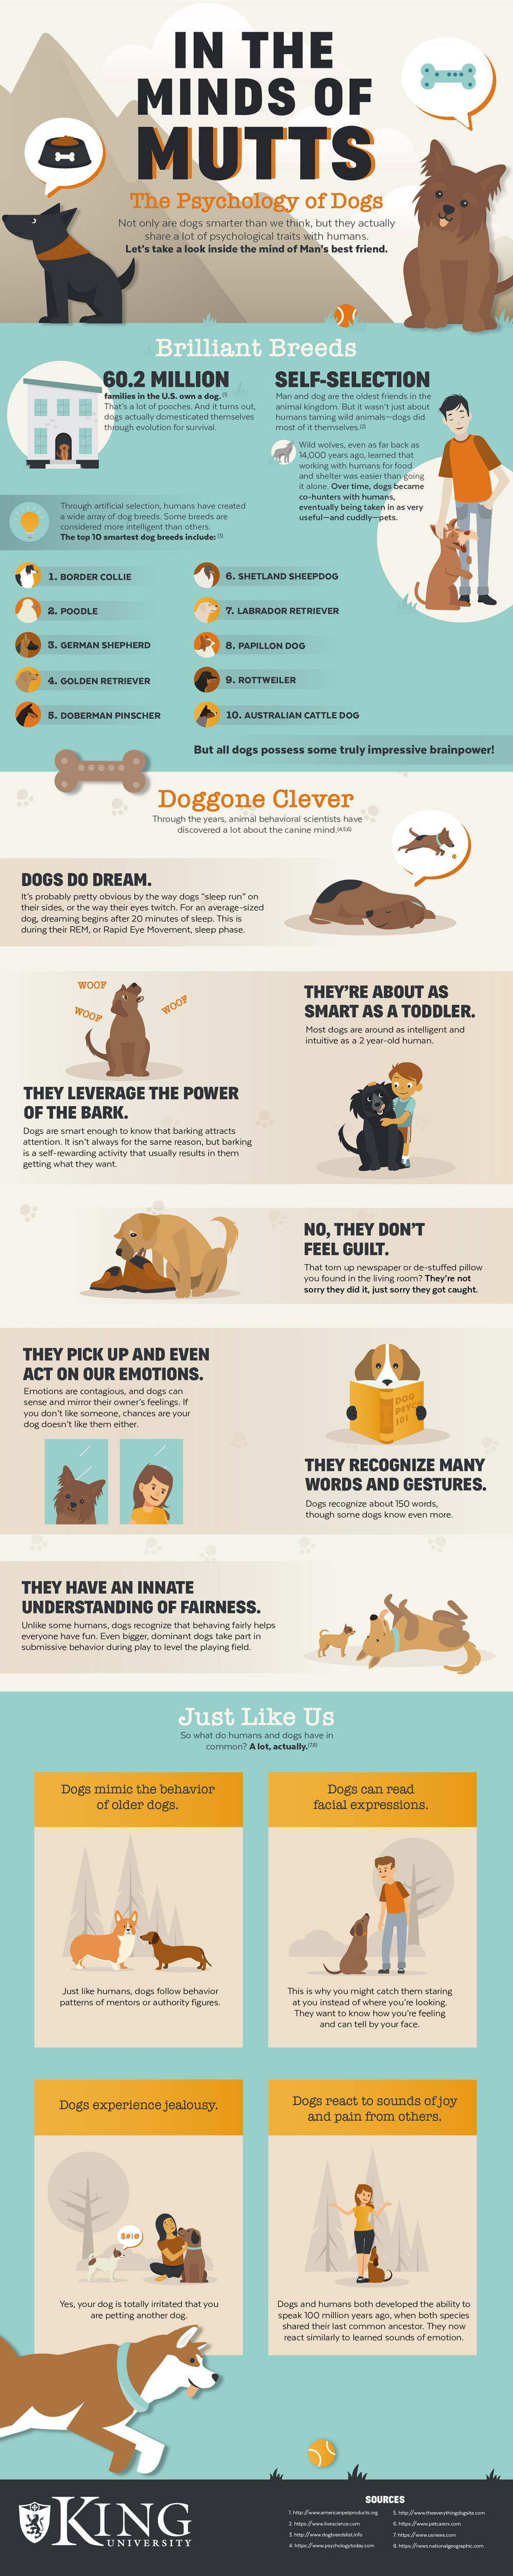 Dog Psychology: In the Minds of Mutts